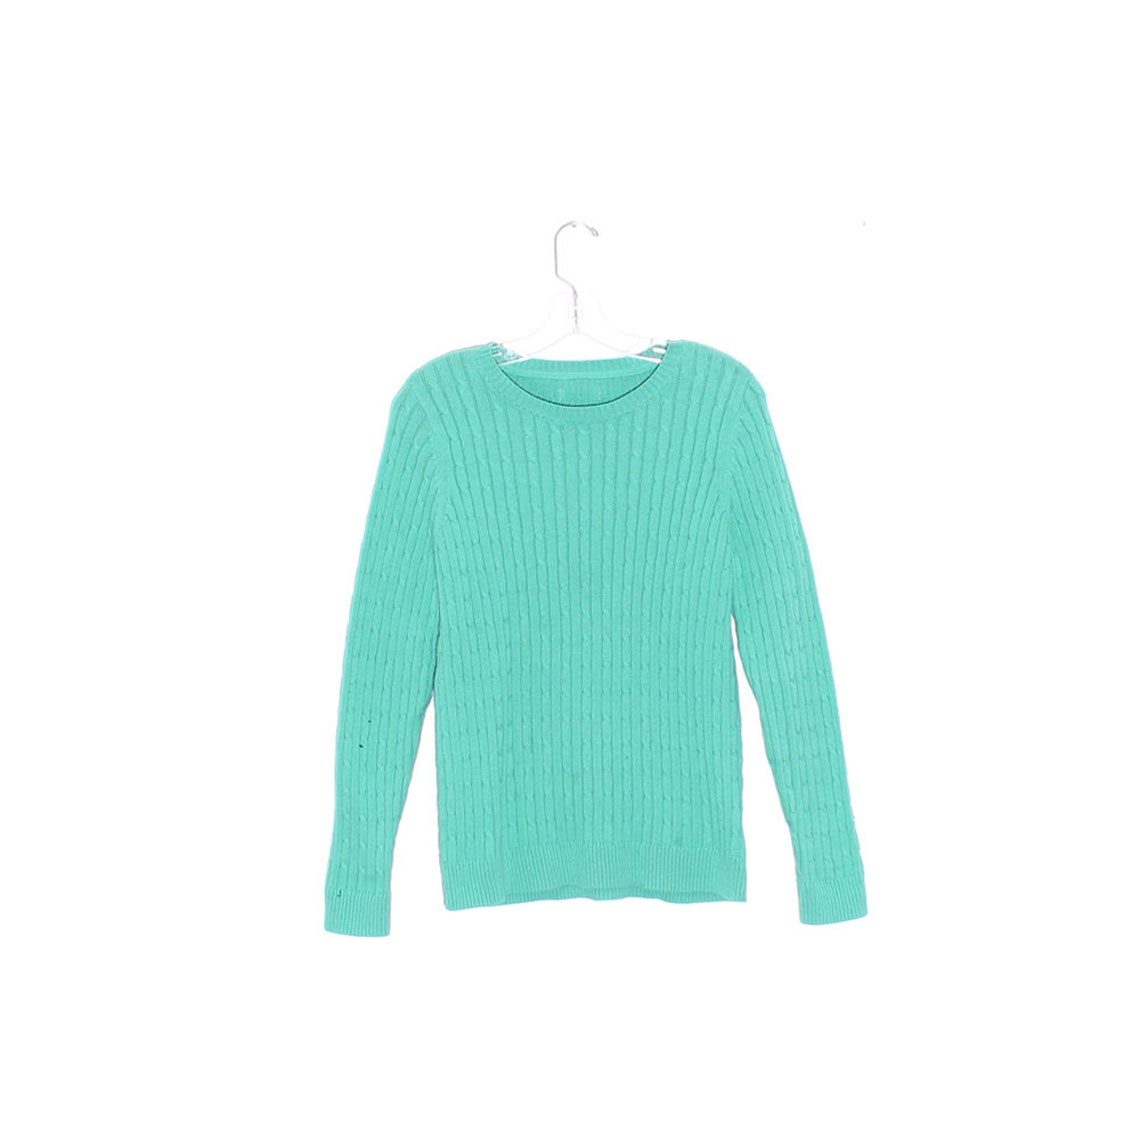 Cable Knit Sweater SEAFOAM GREEN Vintage Sweater Jumper Cotton - Etsy